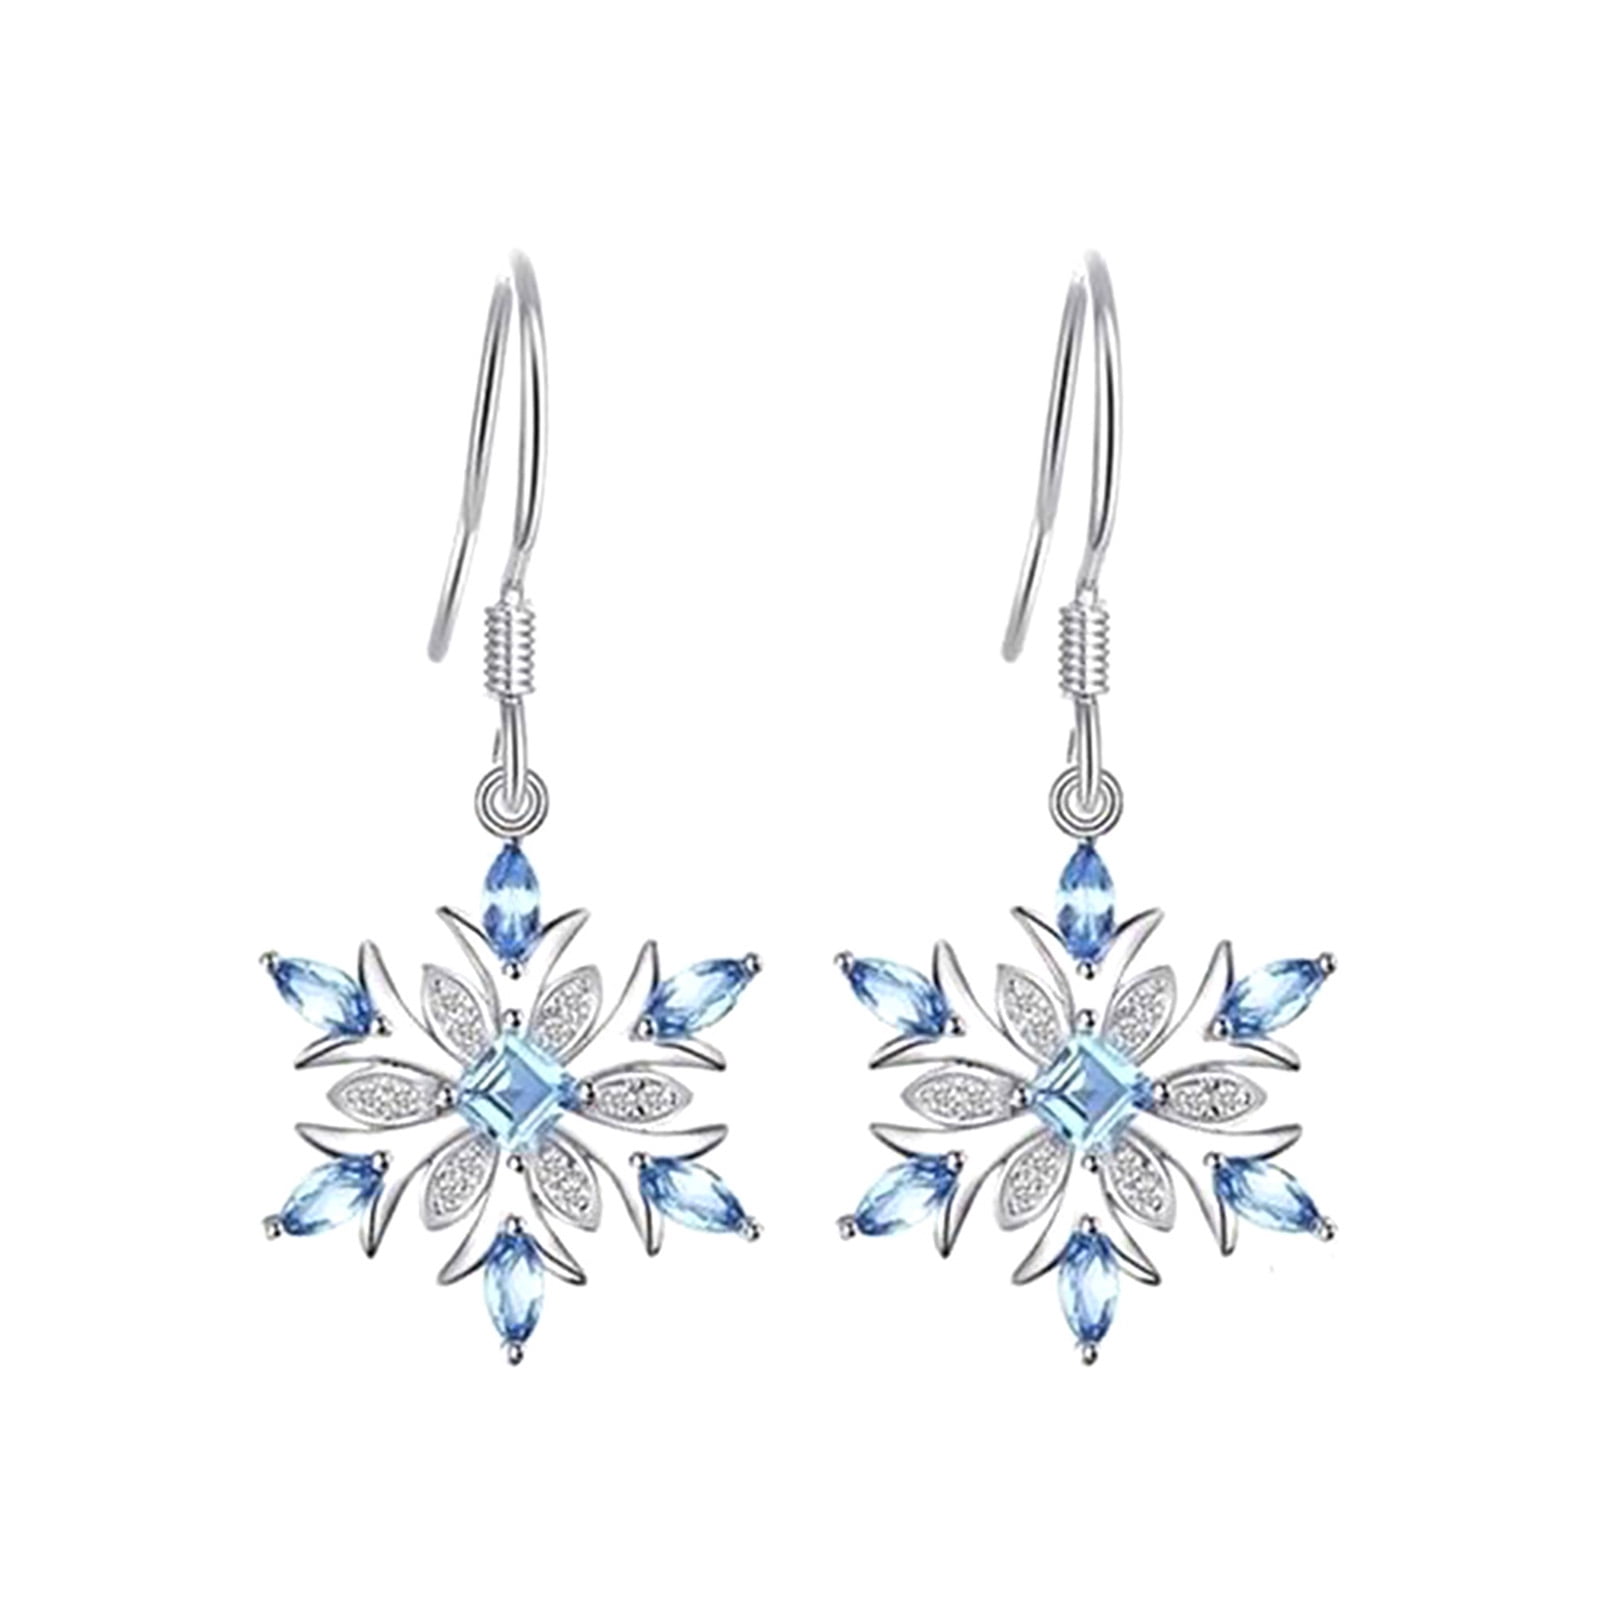 Dangle Earrings Stocking Stuffer Holiday Gifts Winter Accessories Gifts for Her Blue Snowflake Earrings